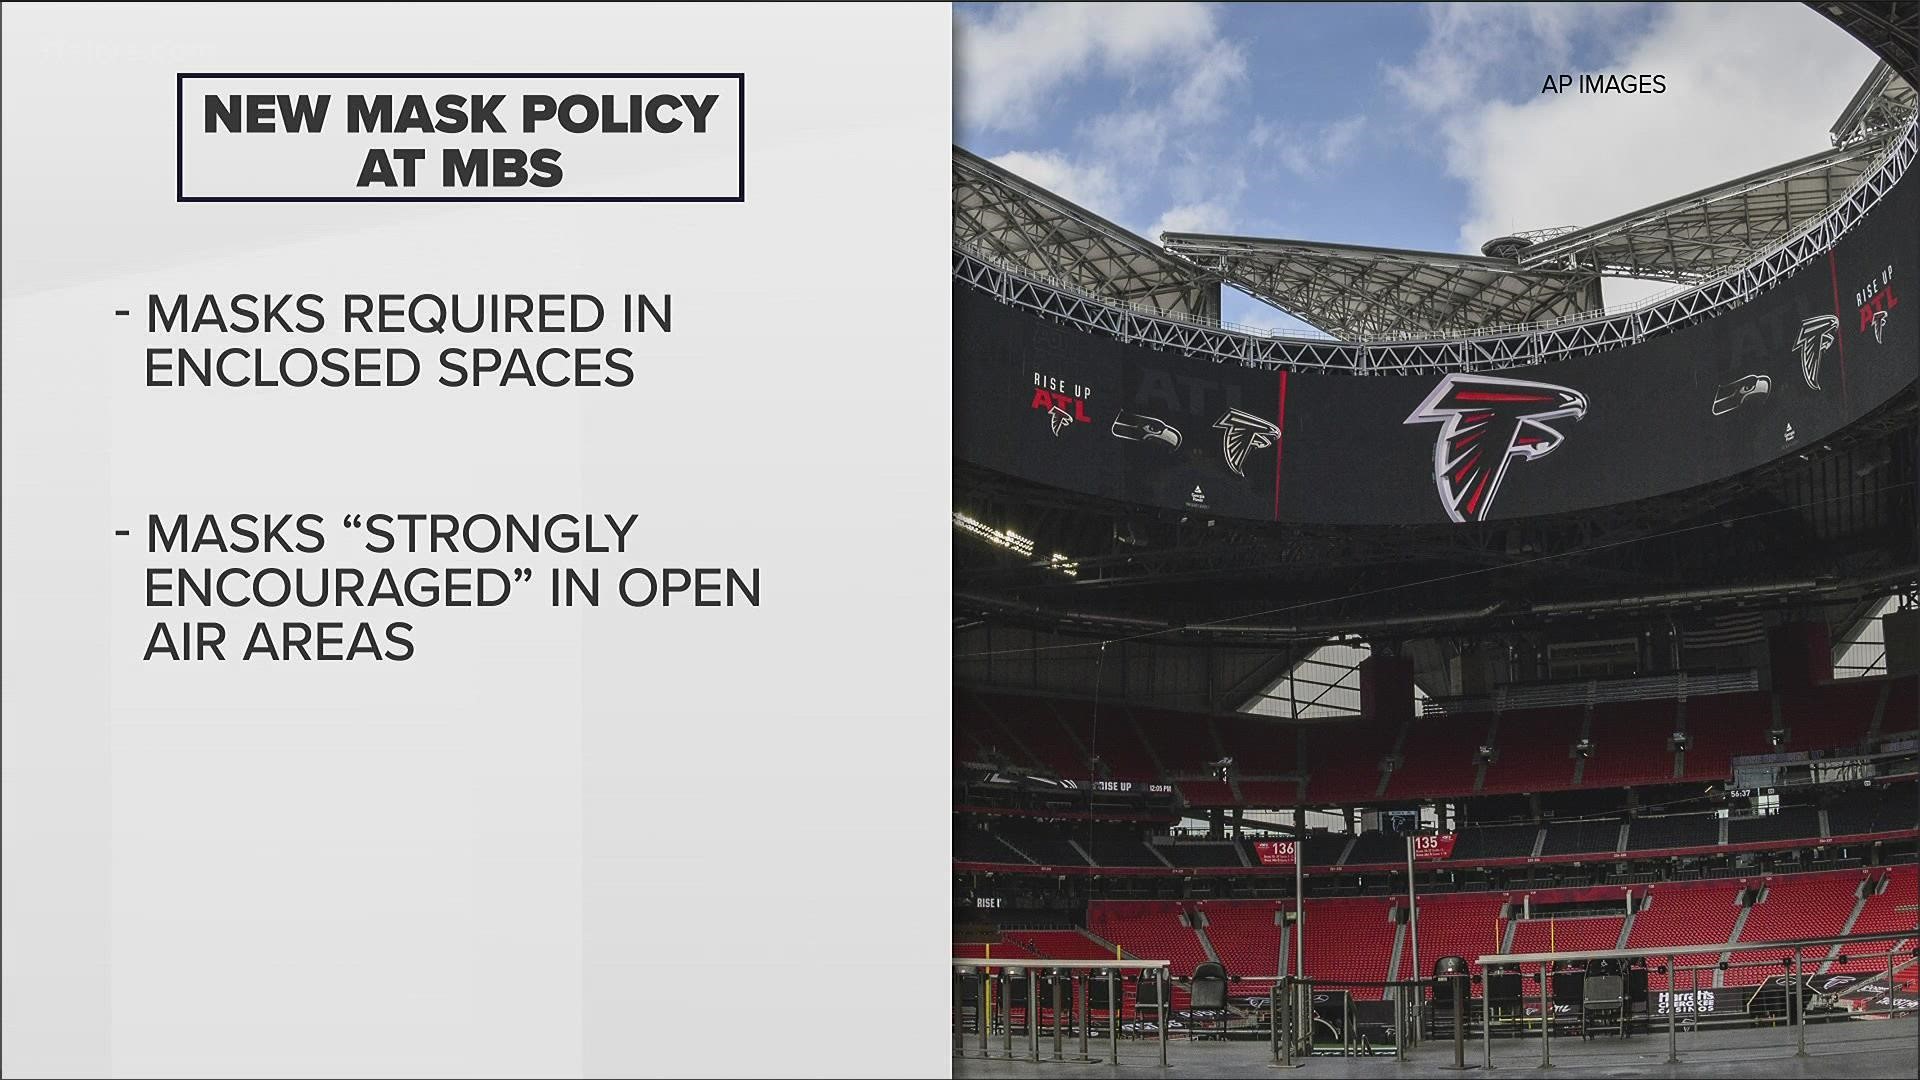 Masks will be required for both fans and employees in enclosed spaces.